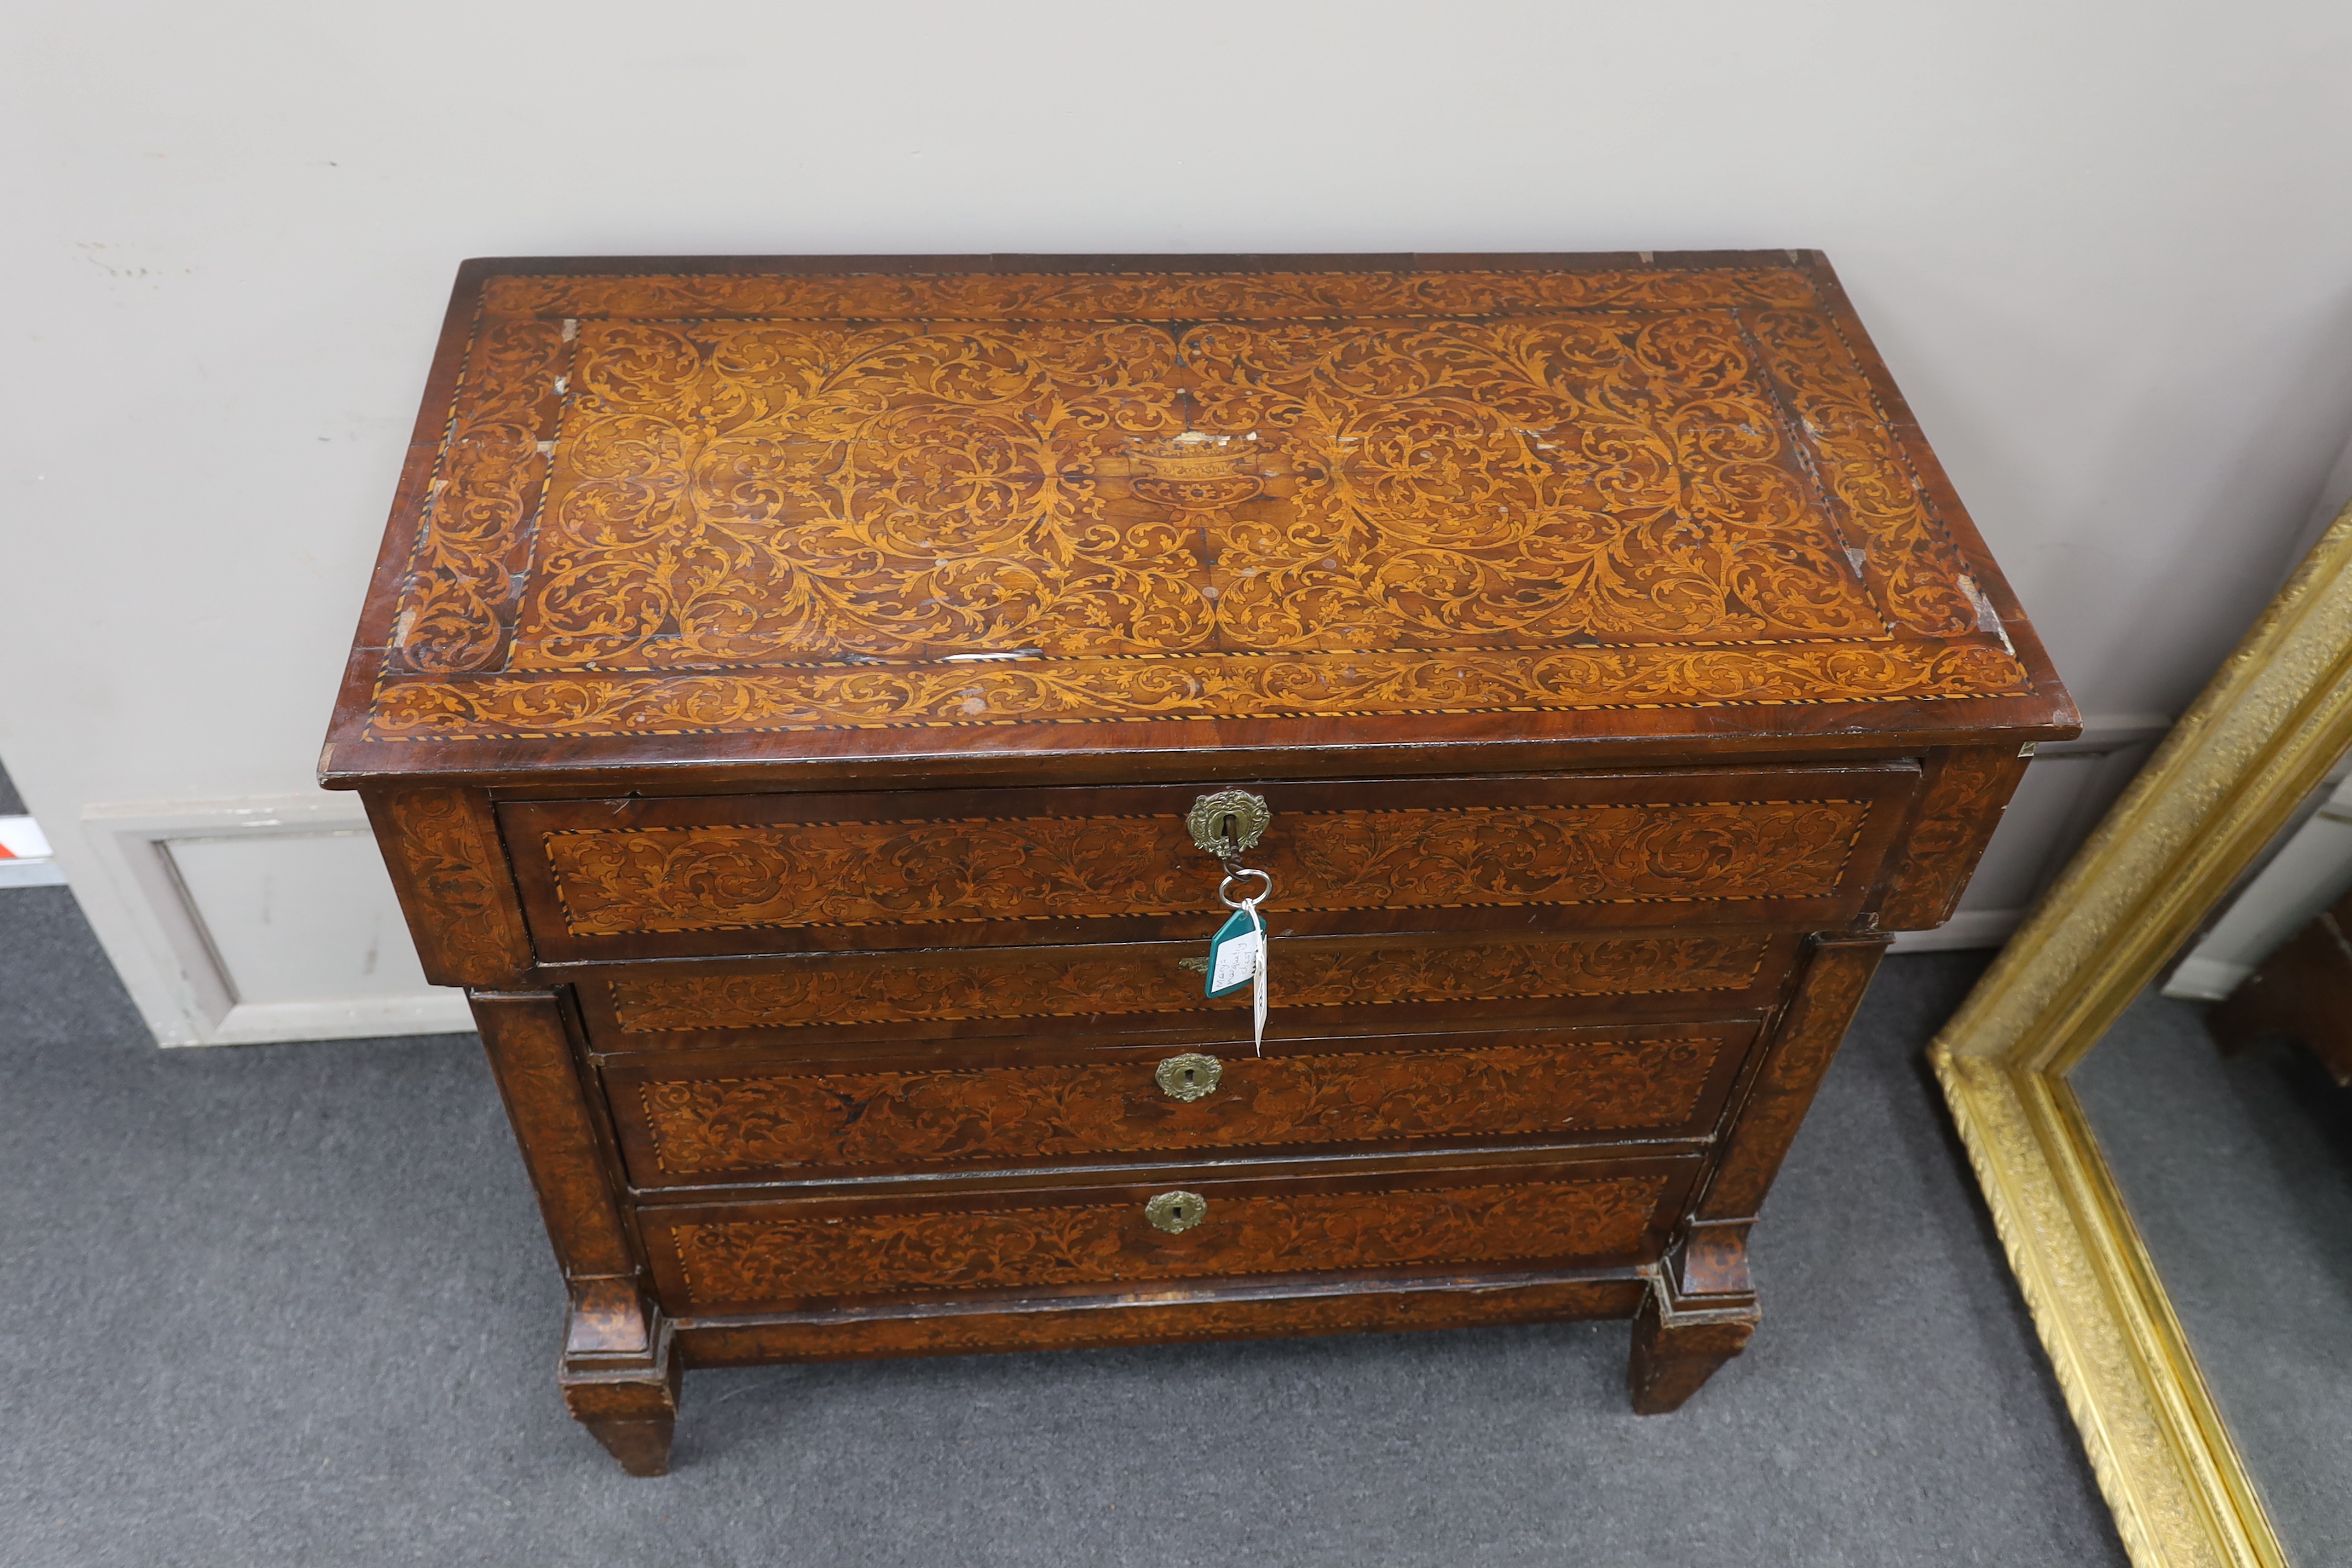 An early 19th century Dutch floral marquetry walnut commode, width 98cm, depth 49cm, height 90cm